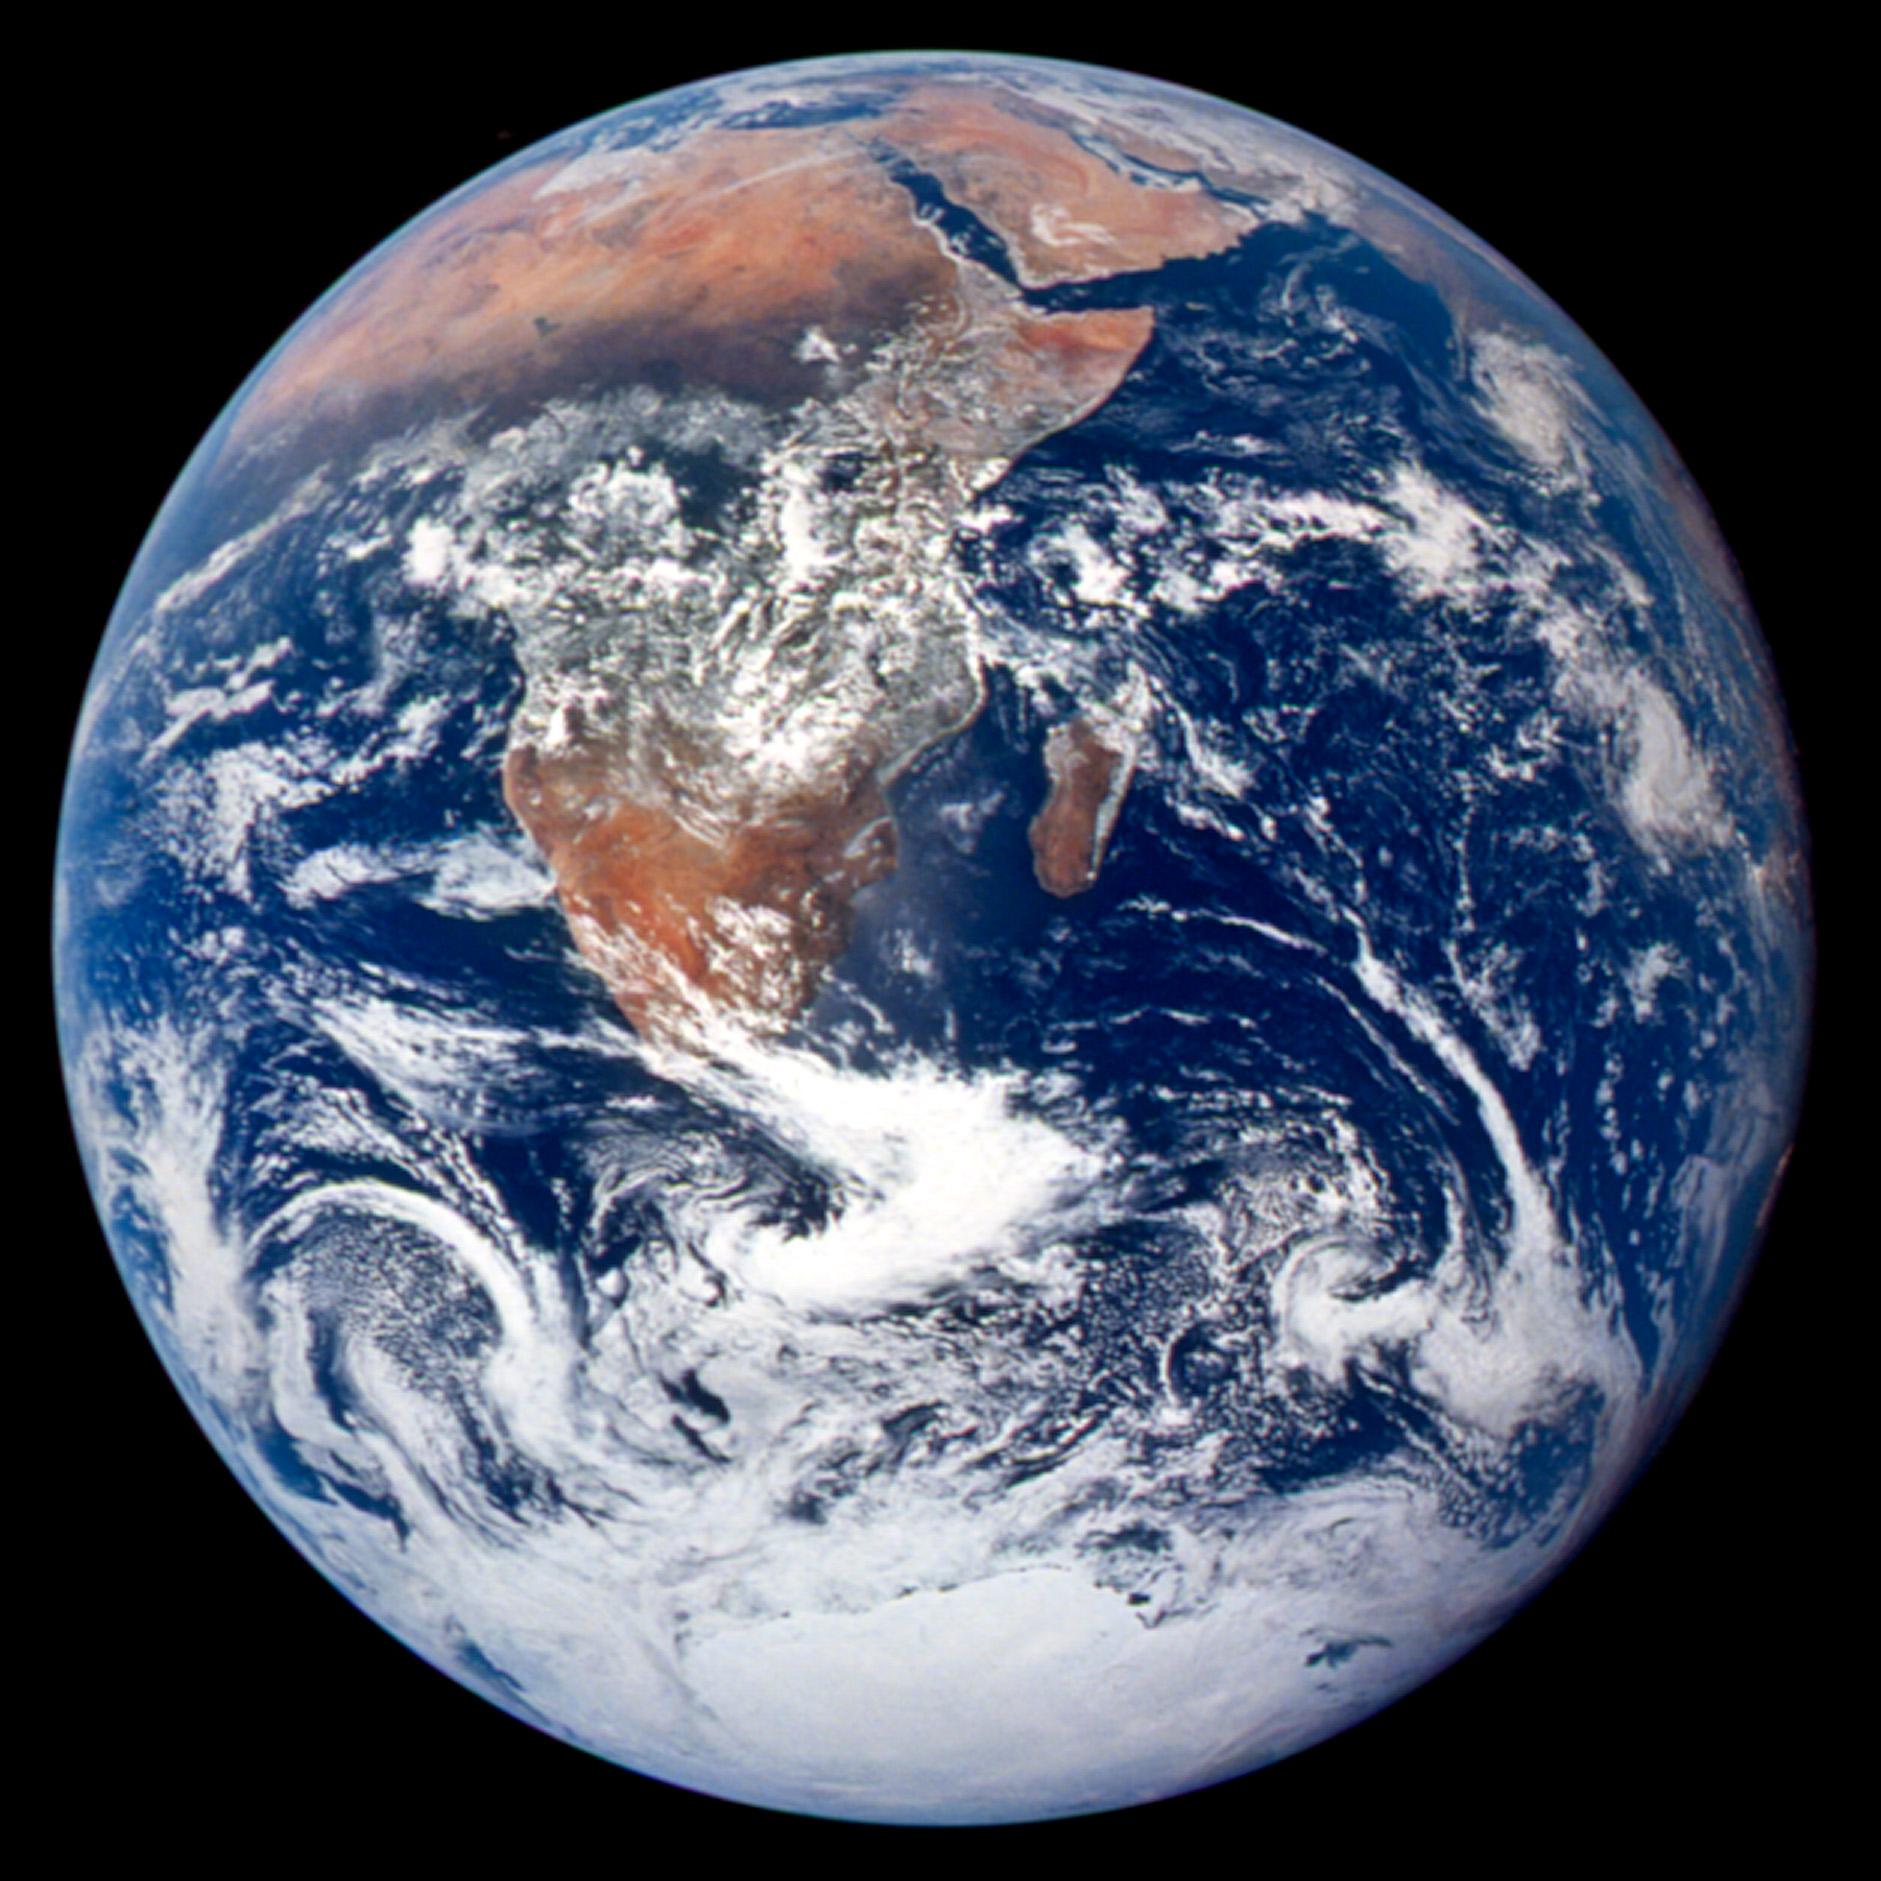 Desktop Wallpaper: The Blue Marble known as Earth